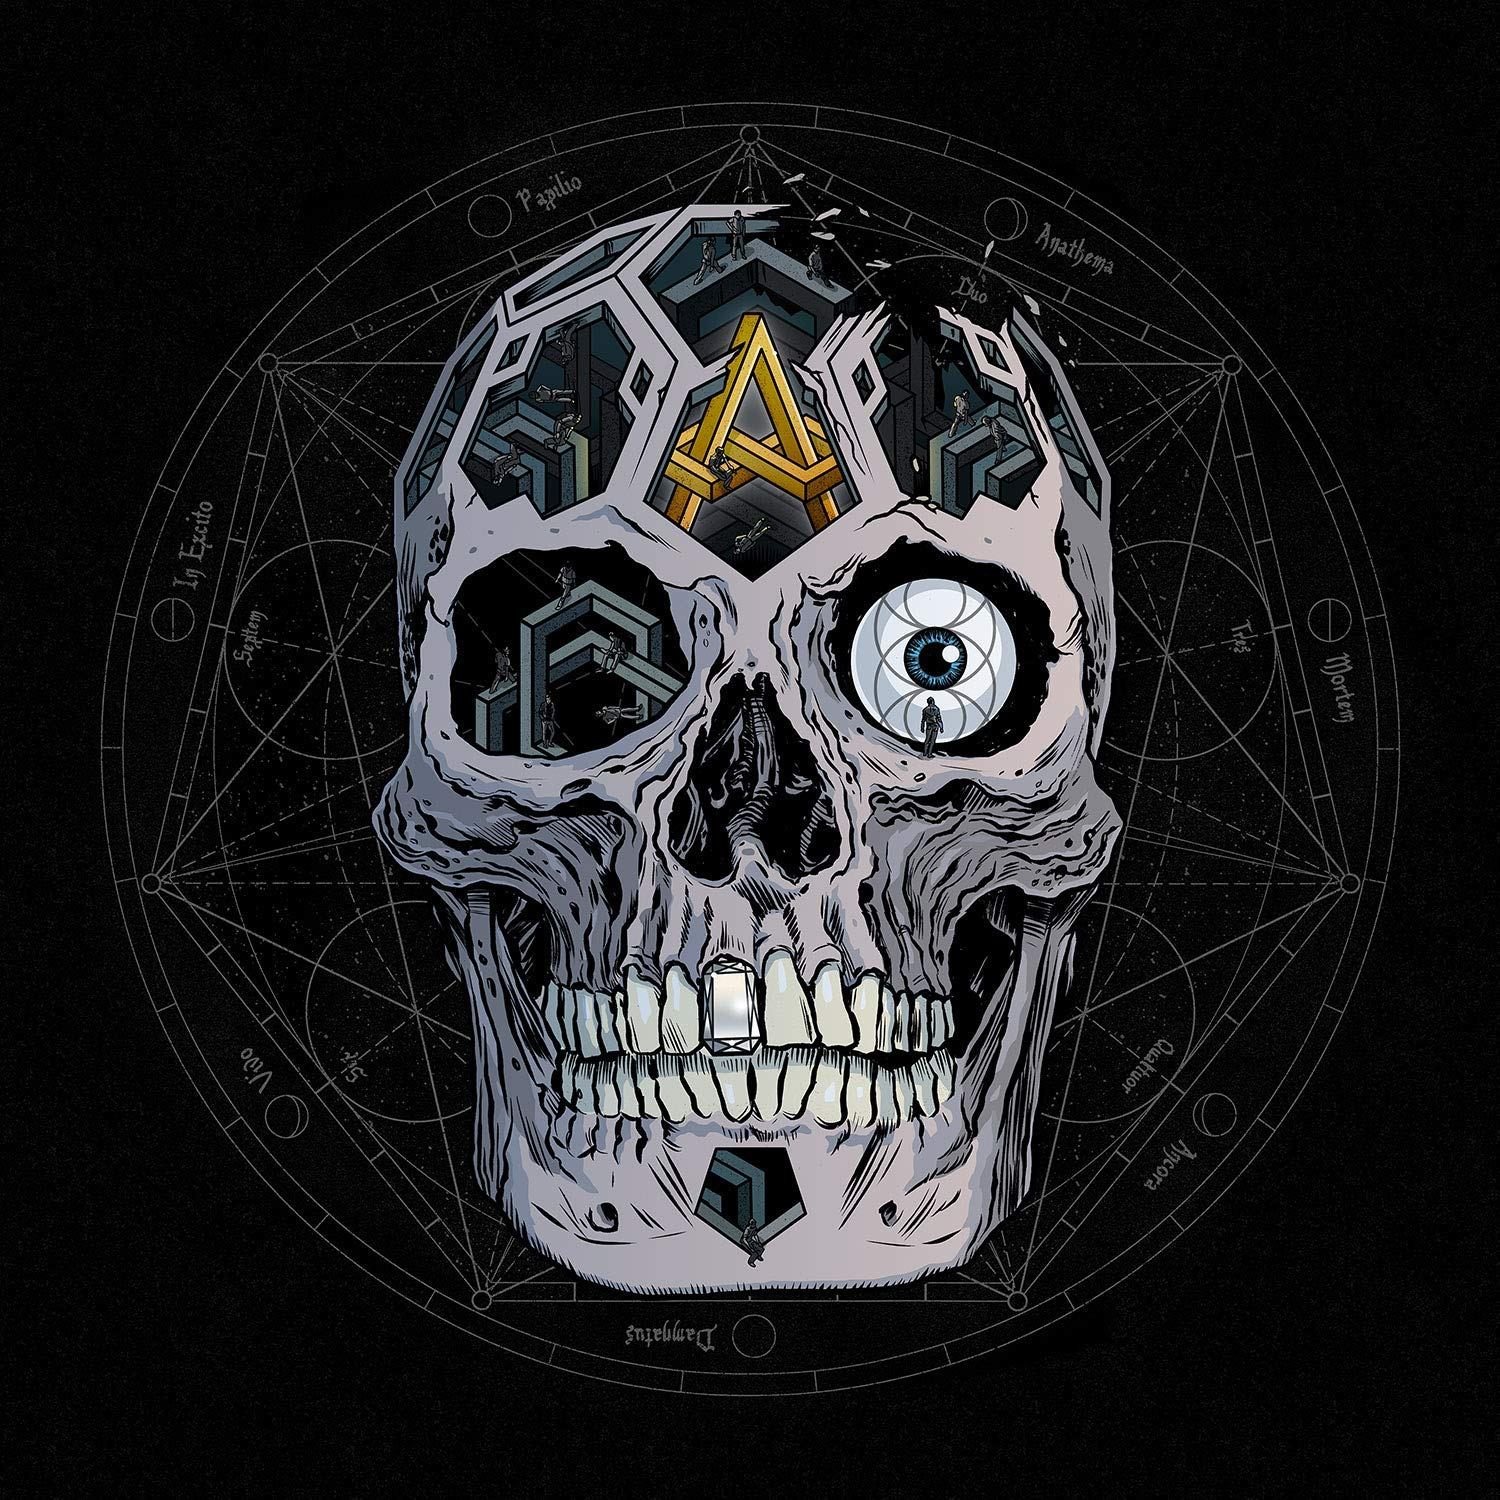 Atreyu Releases “In Our Wake”